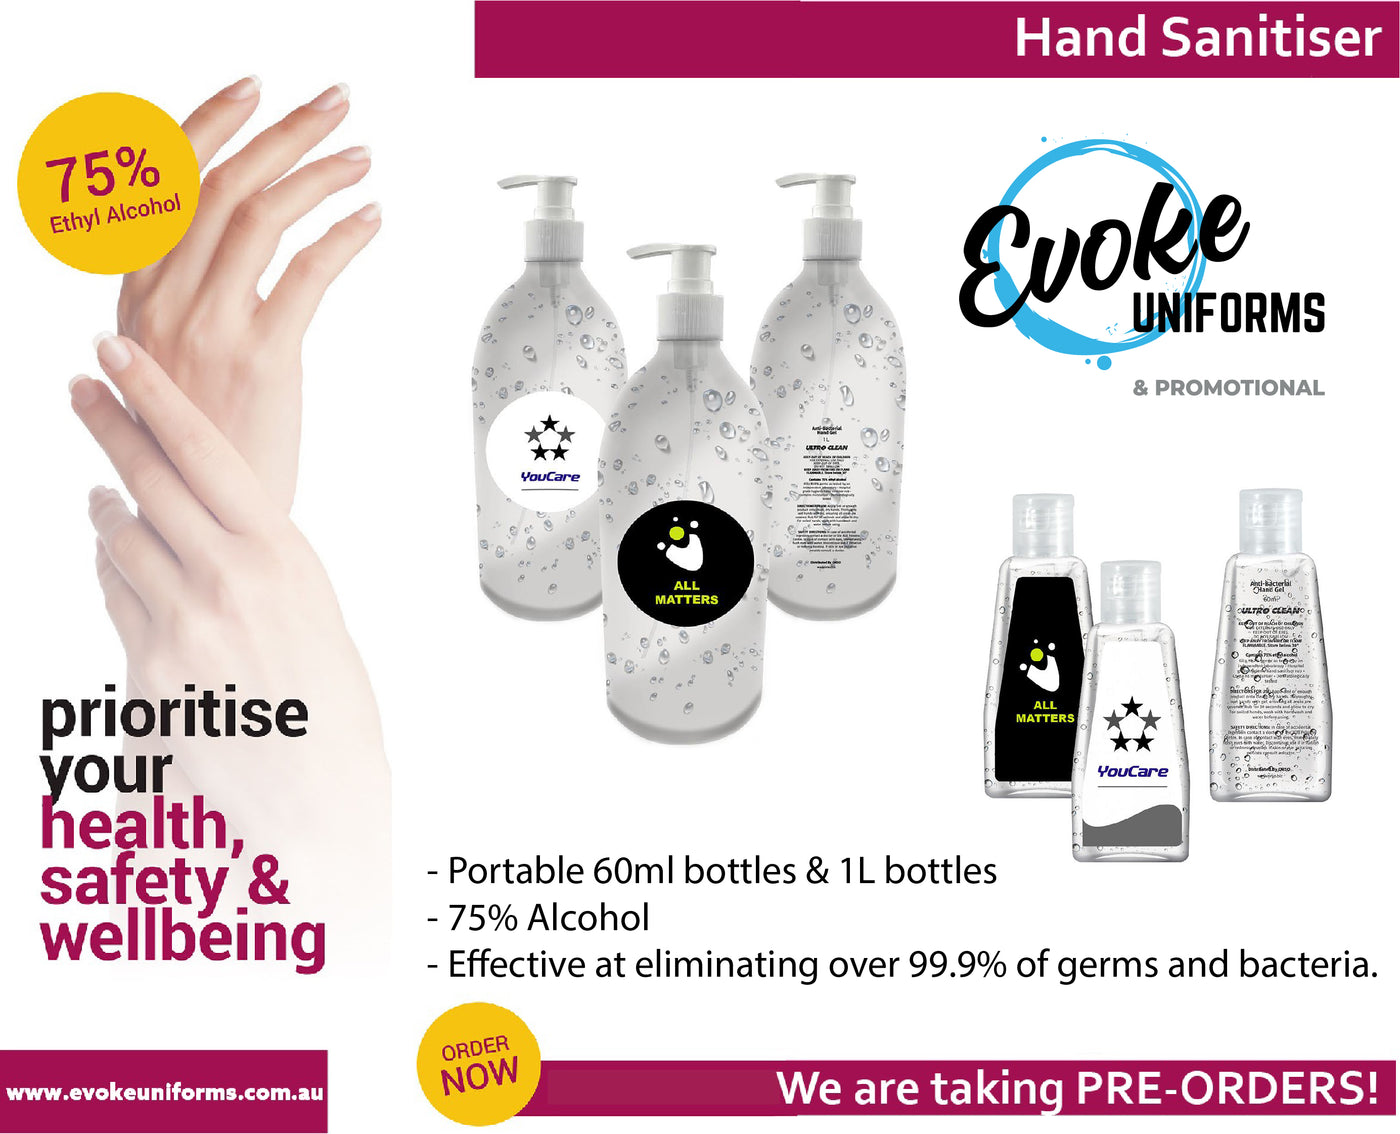 Hand sanitiser is coming!!